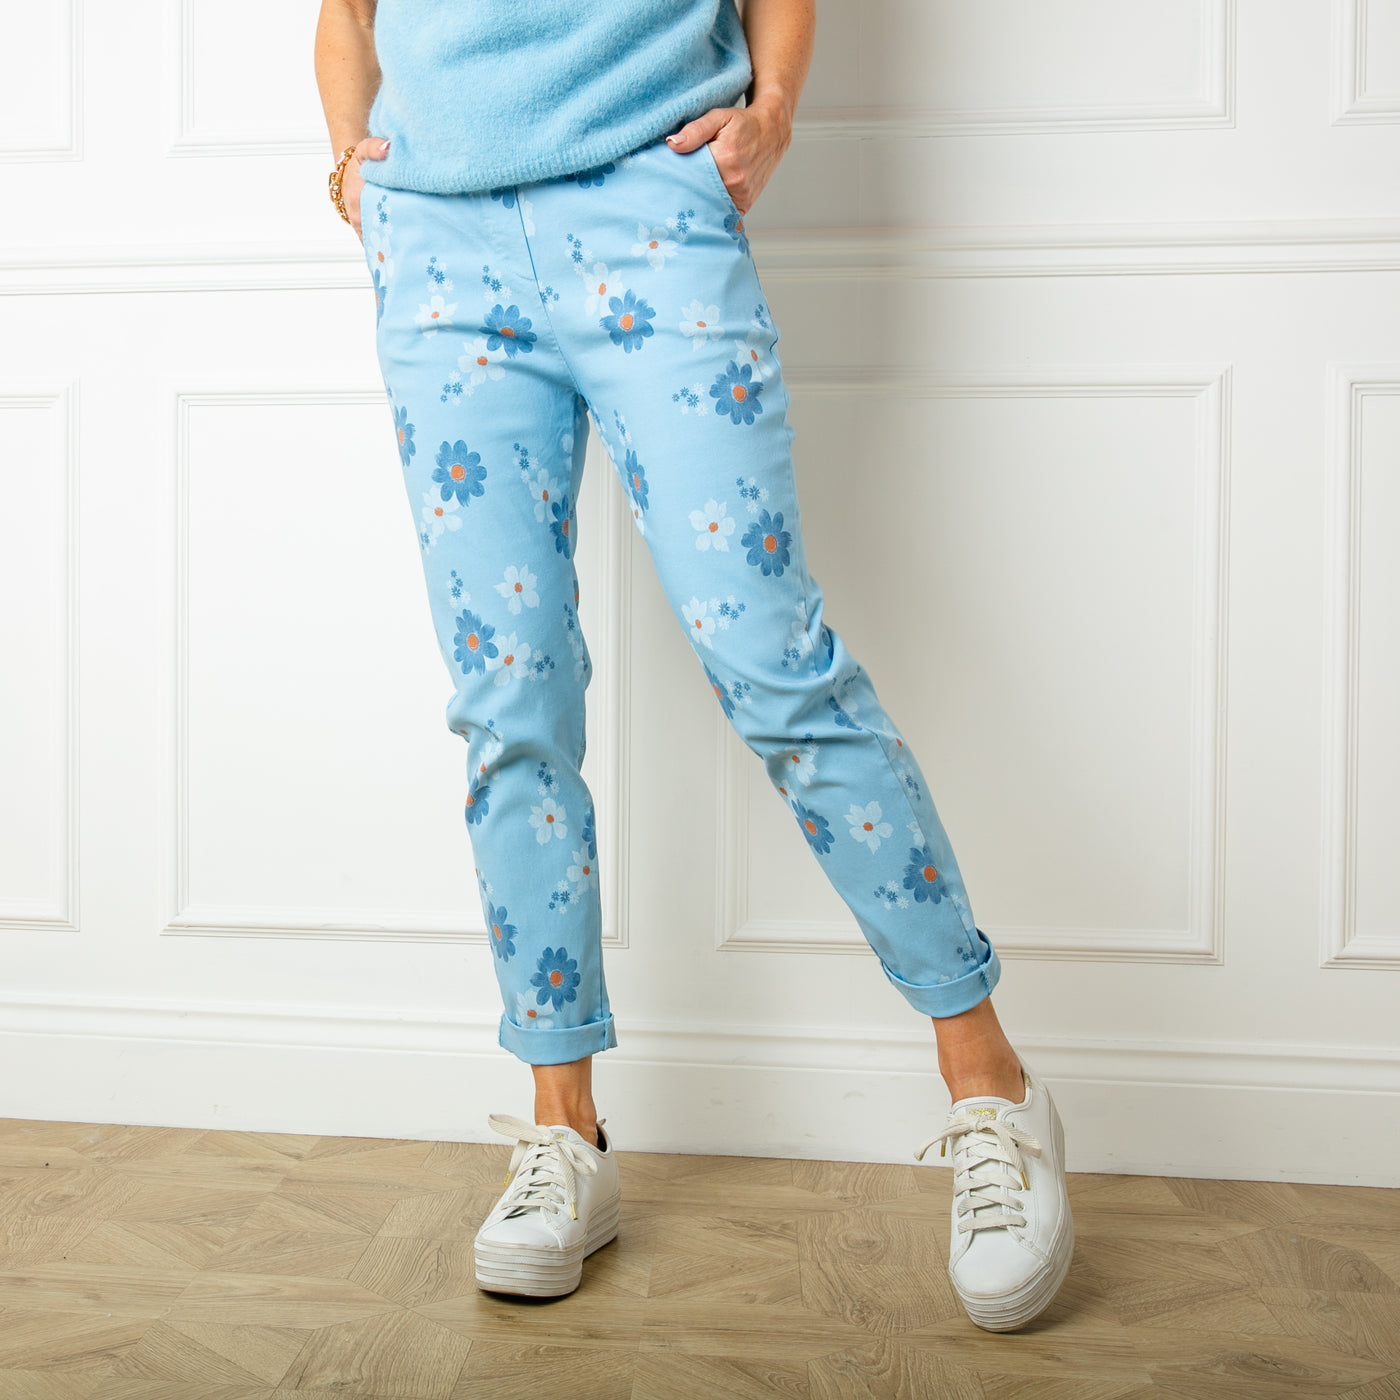 The baby blue Slim Fit Floral Trousers with pockets in either side